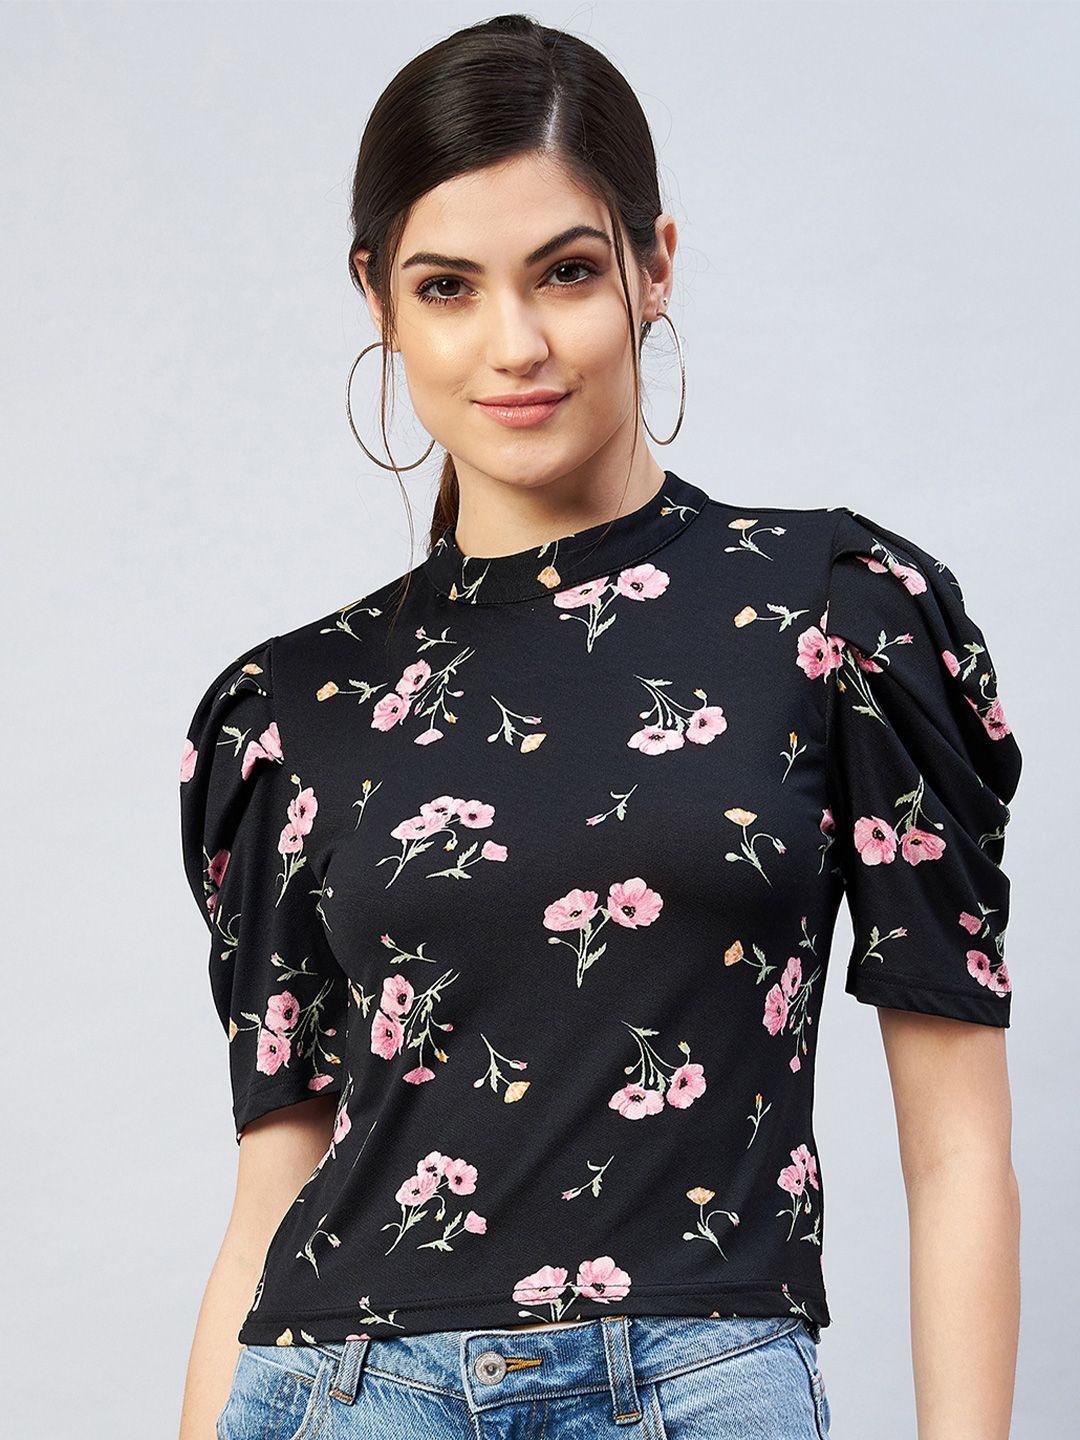 marie-claire-black-&-pink-floral-printed-styled-back-top